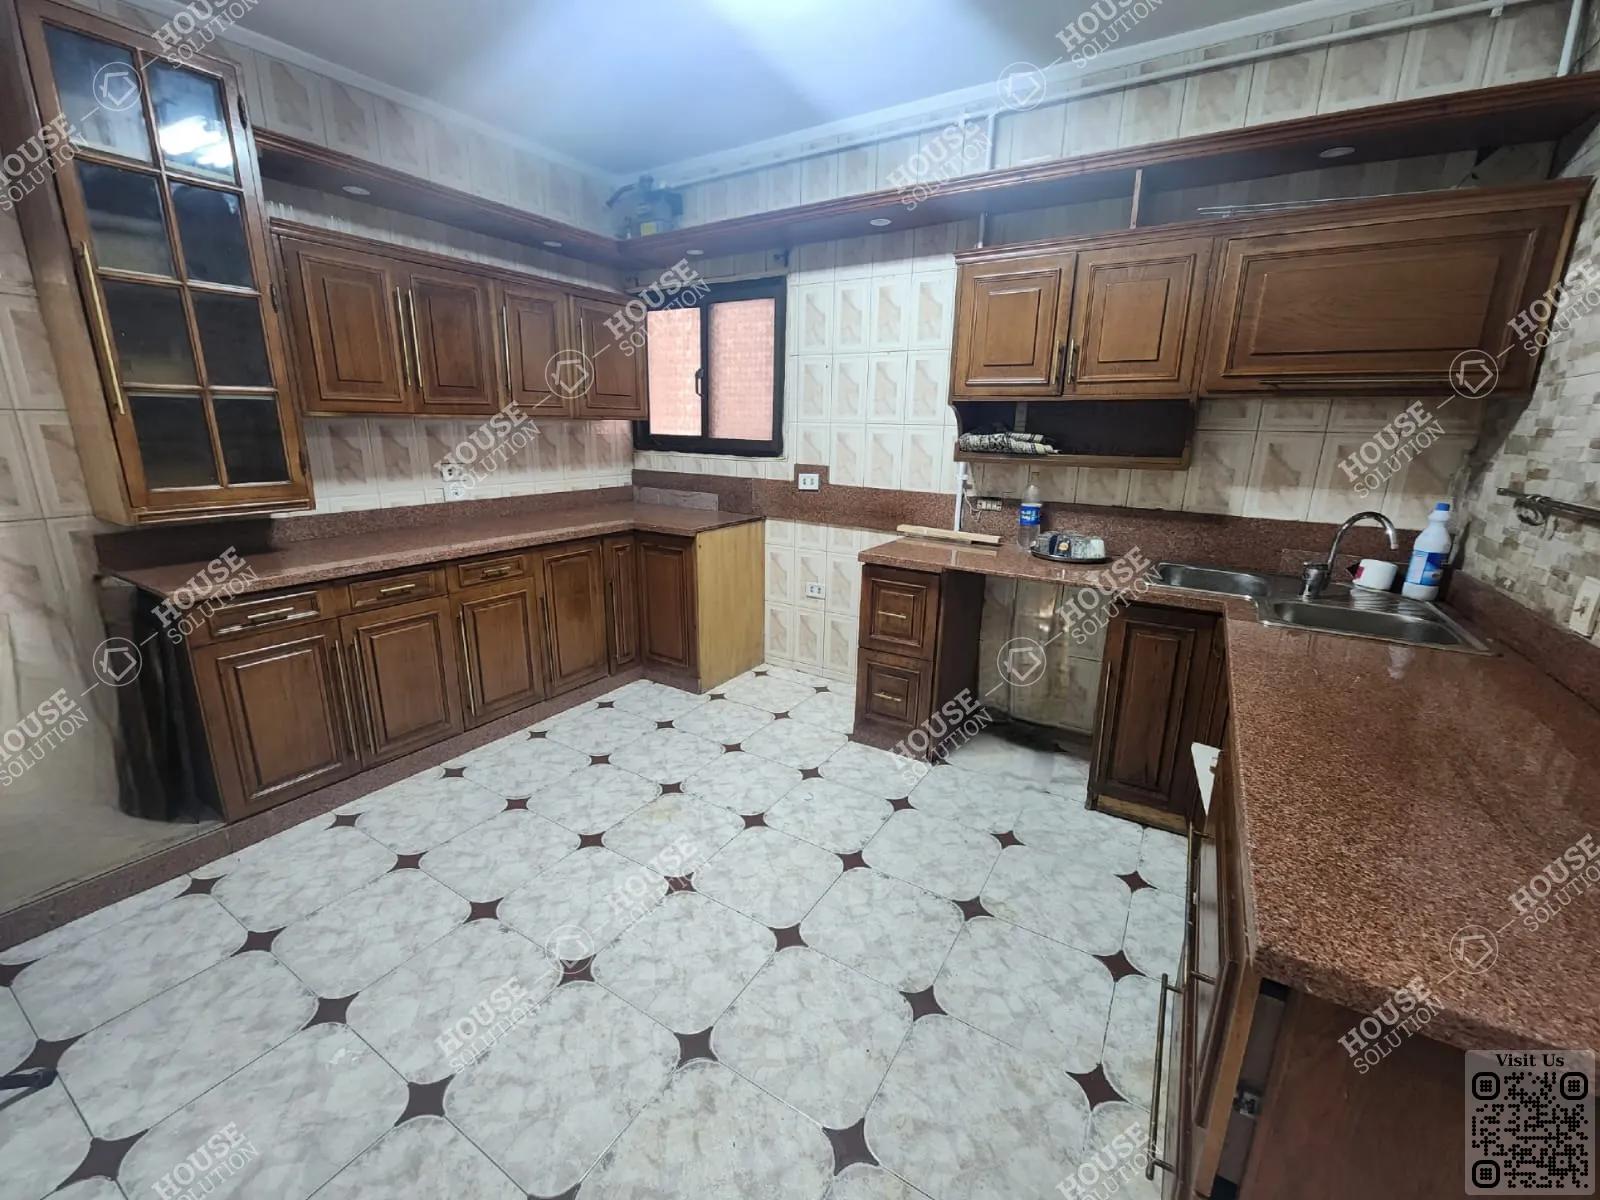 KITCHEN  @ Apartments For Rent In Maadi New Maadi Area: 175 m² consists of 3 Bedrooms 2 Bathrooms Semi furnished 5 stars #5776-2